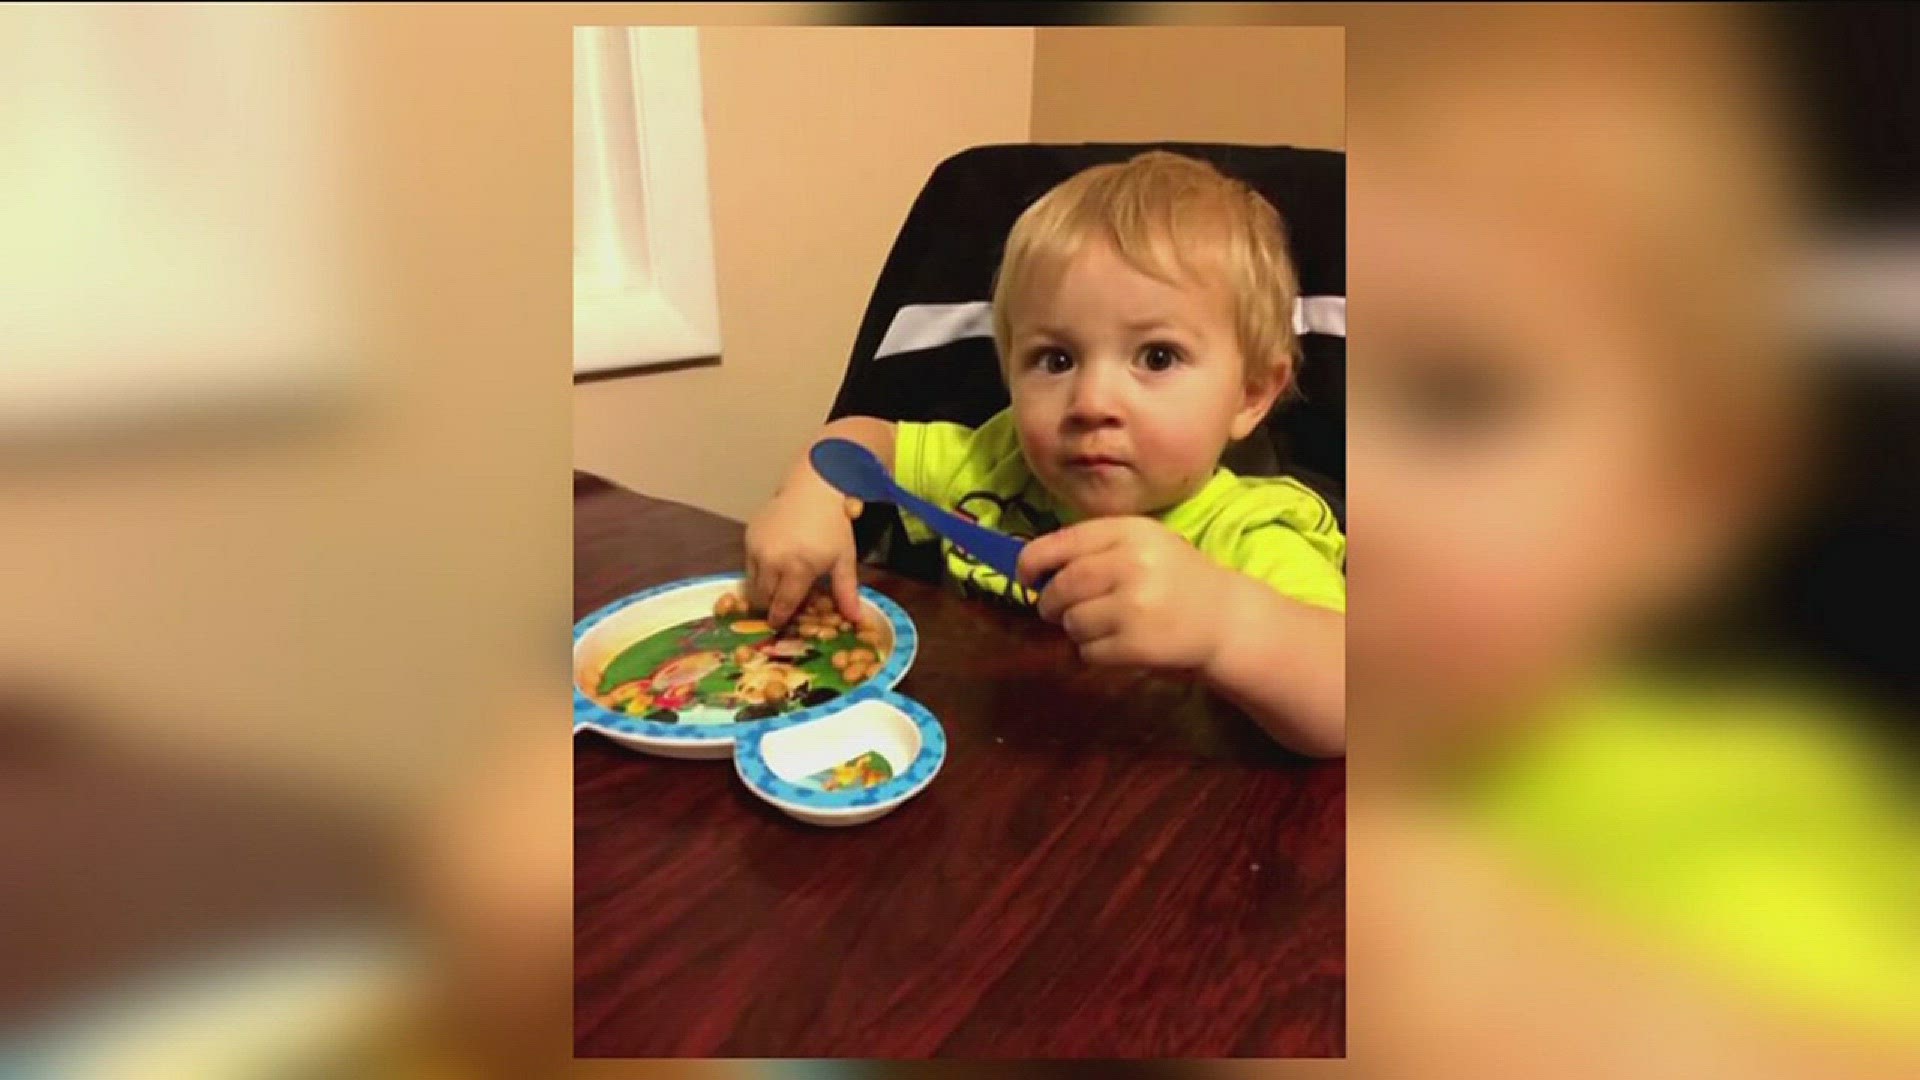 DeOrr Kunz, Jr., was two years old when he disappeared on July 10, 2015. On Saturday, some family members gathered at the Timber Creek Campsite to search.